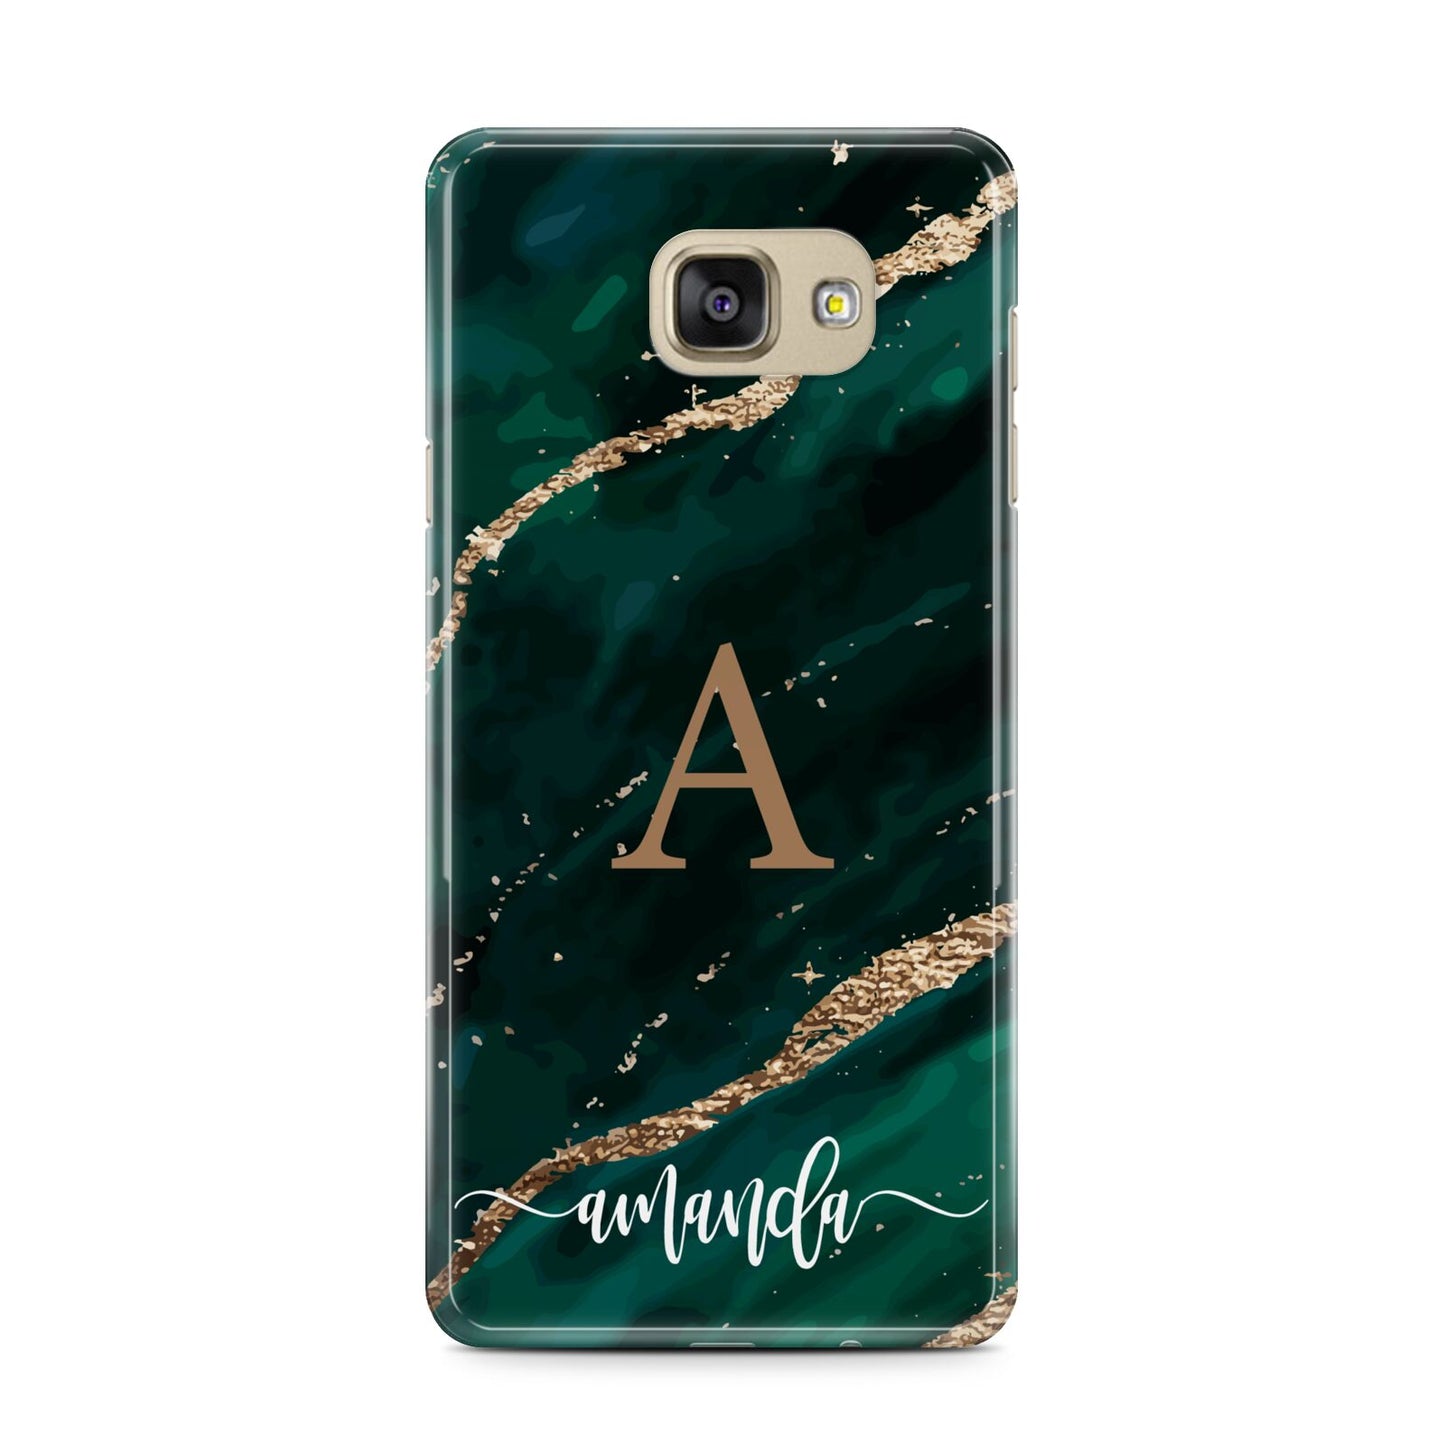 Green Marble Samsung Galaxy A7 2016 Case on gold phone